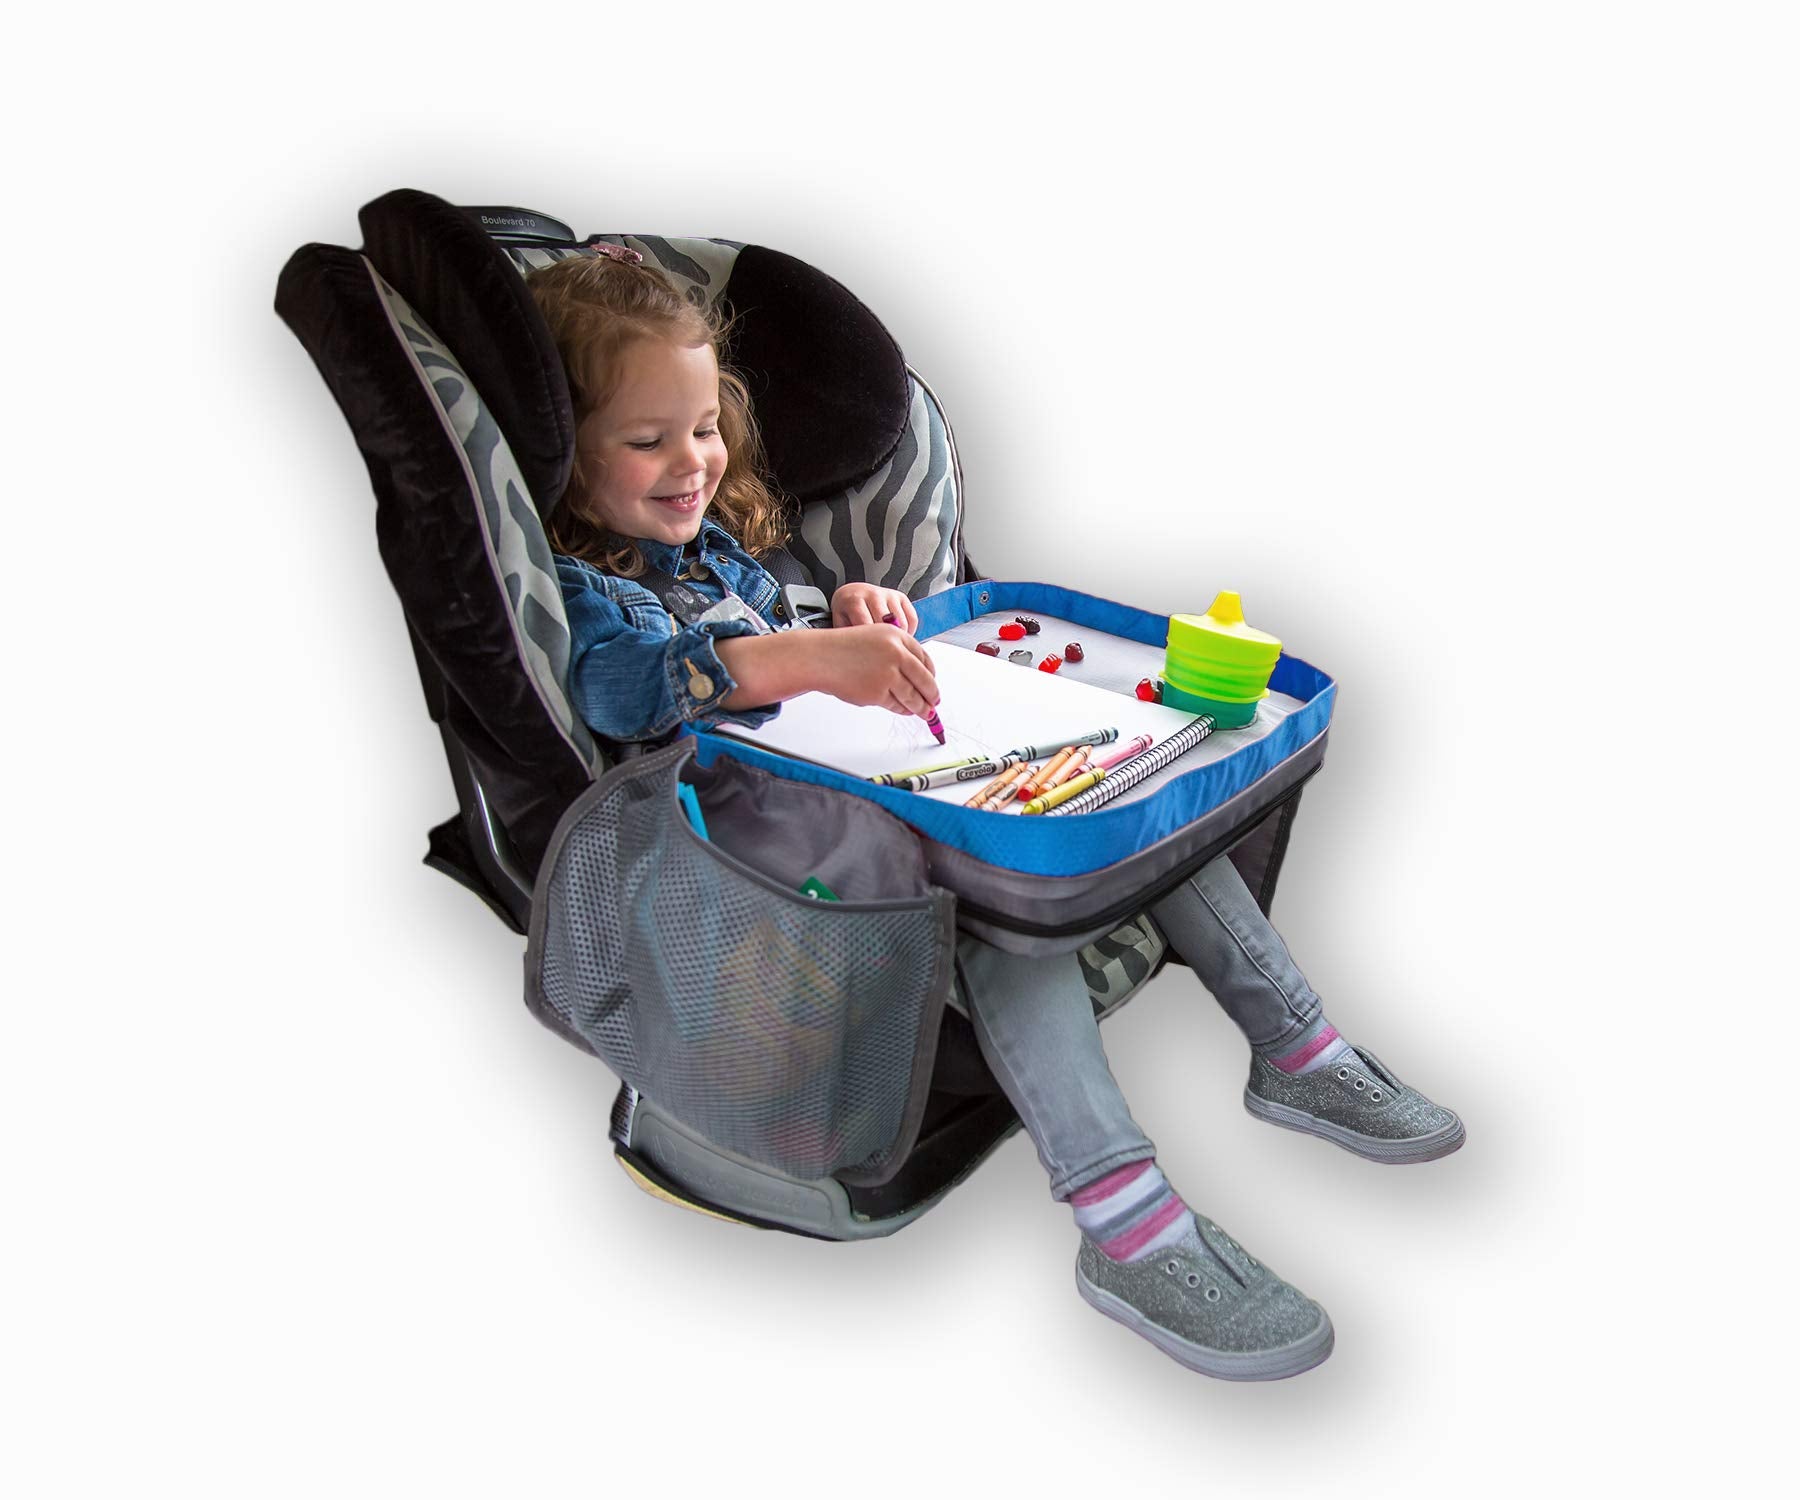 Other Car Seats Accessories Kids E Z Travel Lap Desk Tray